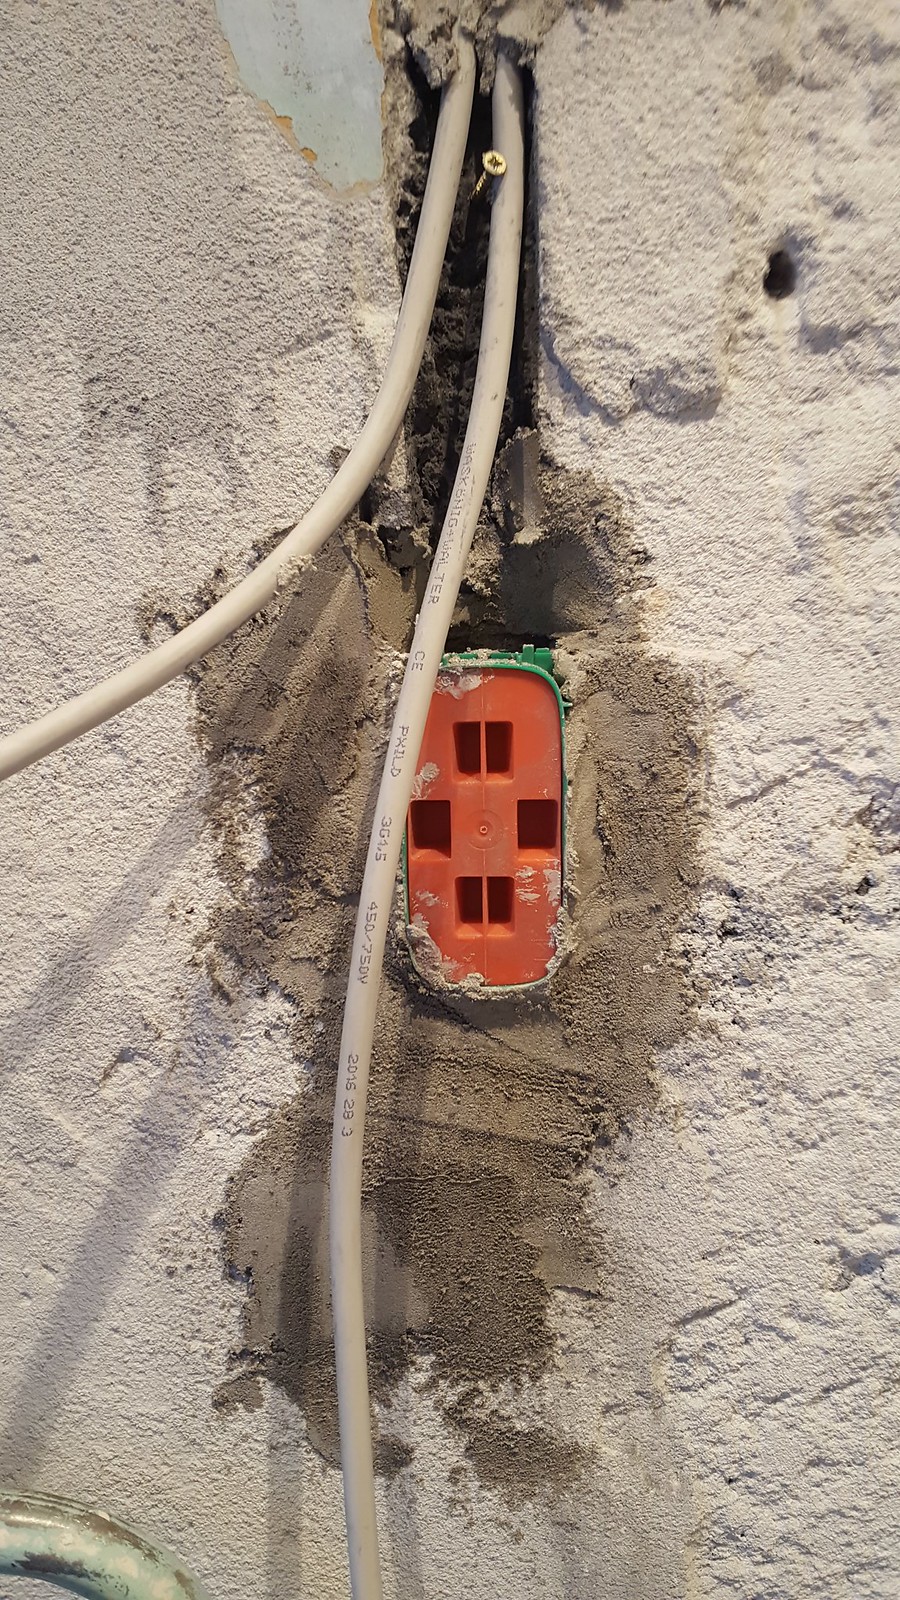 Hiding the Electrical Cables